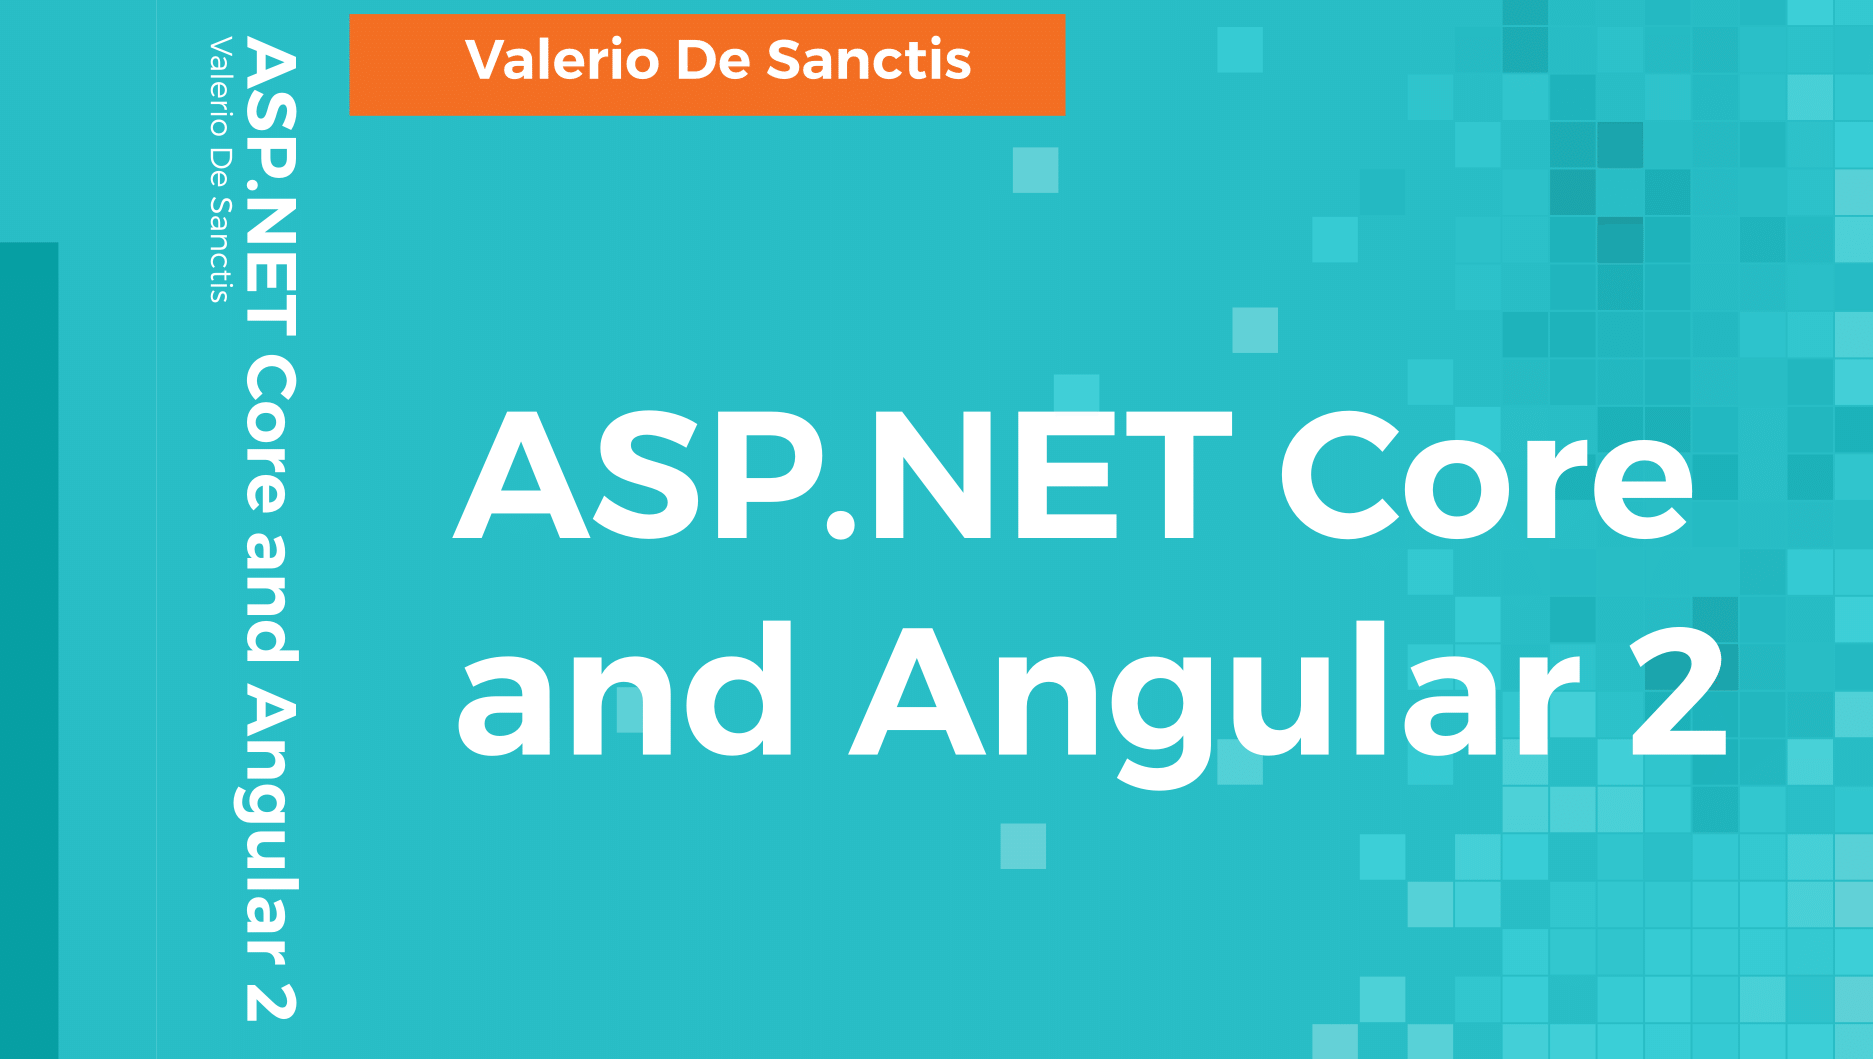 ASP.NET Core and Angular 2 - The Book